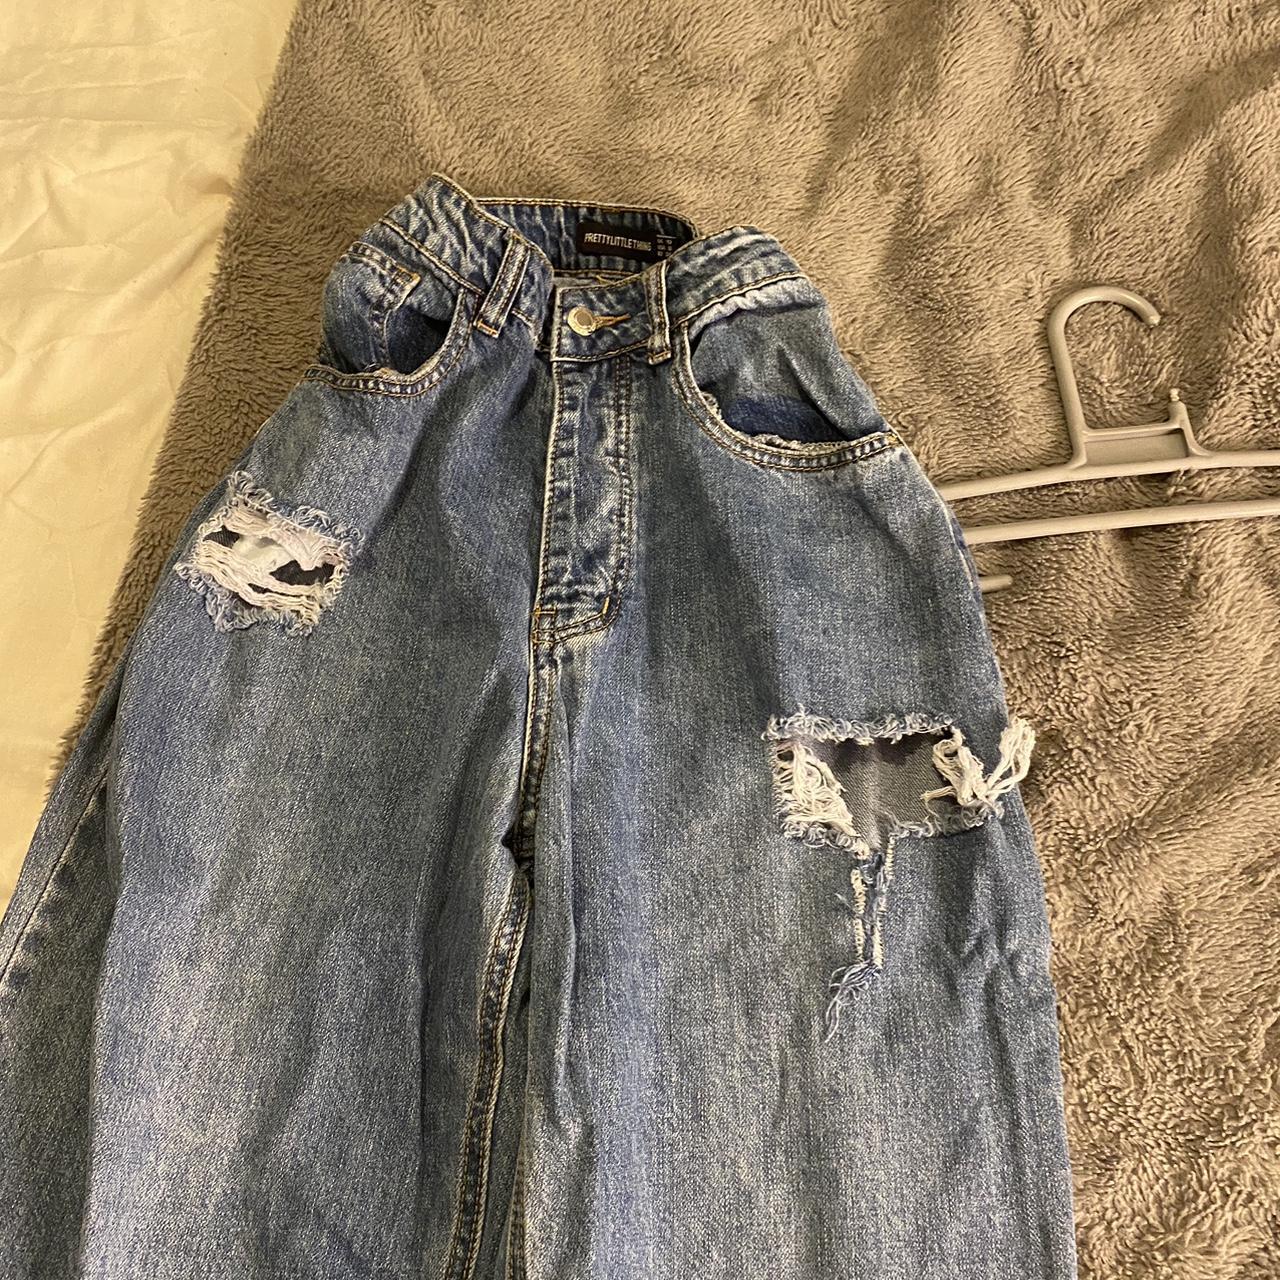 Baggy jeans go good with a cropped top - Depop